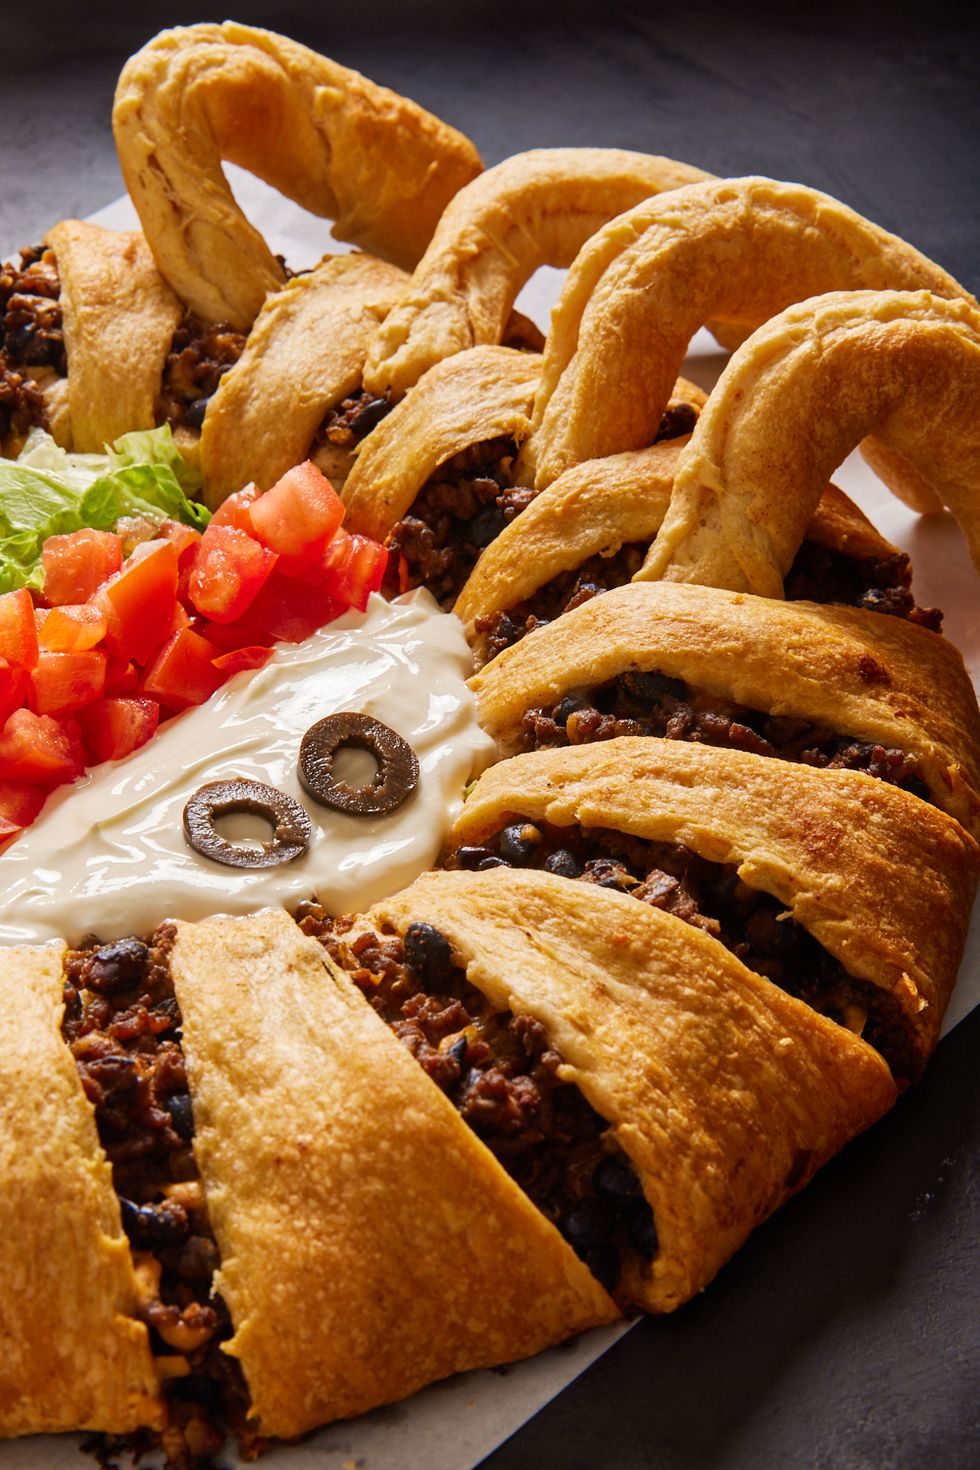 https://hips.hearstapps.com/hmg-prod/images/221011-delish-seo-spider-taco-ring-0991-eb-1666030822.jpg?crop=0.9057971014492754xw:1xh;center,top&resize=980:*